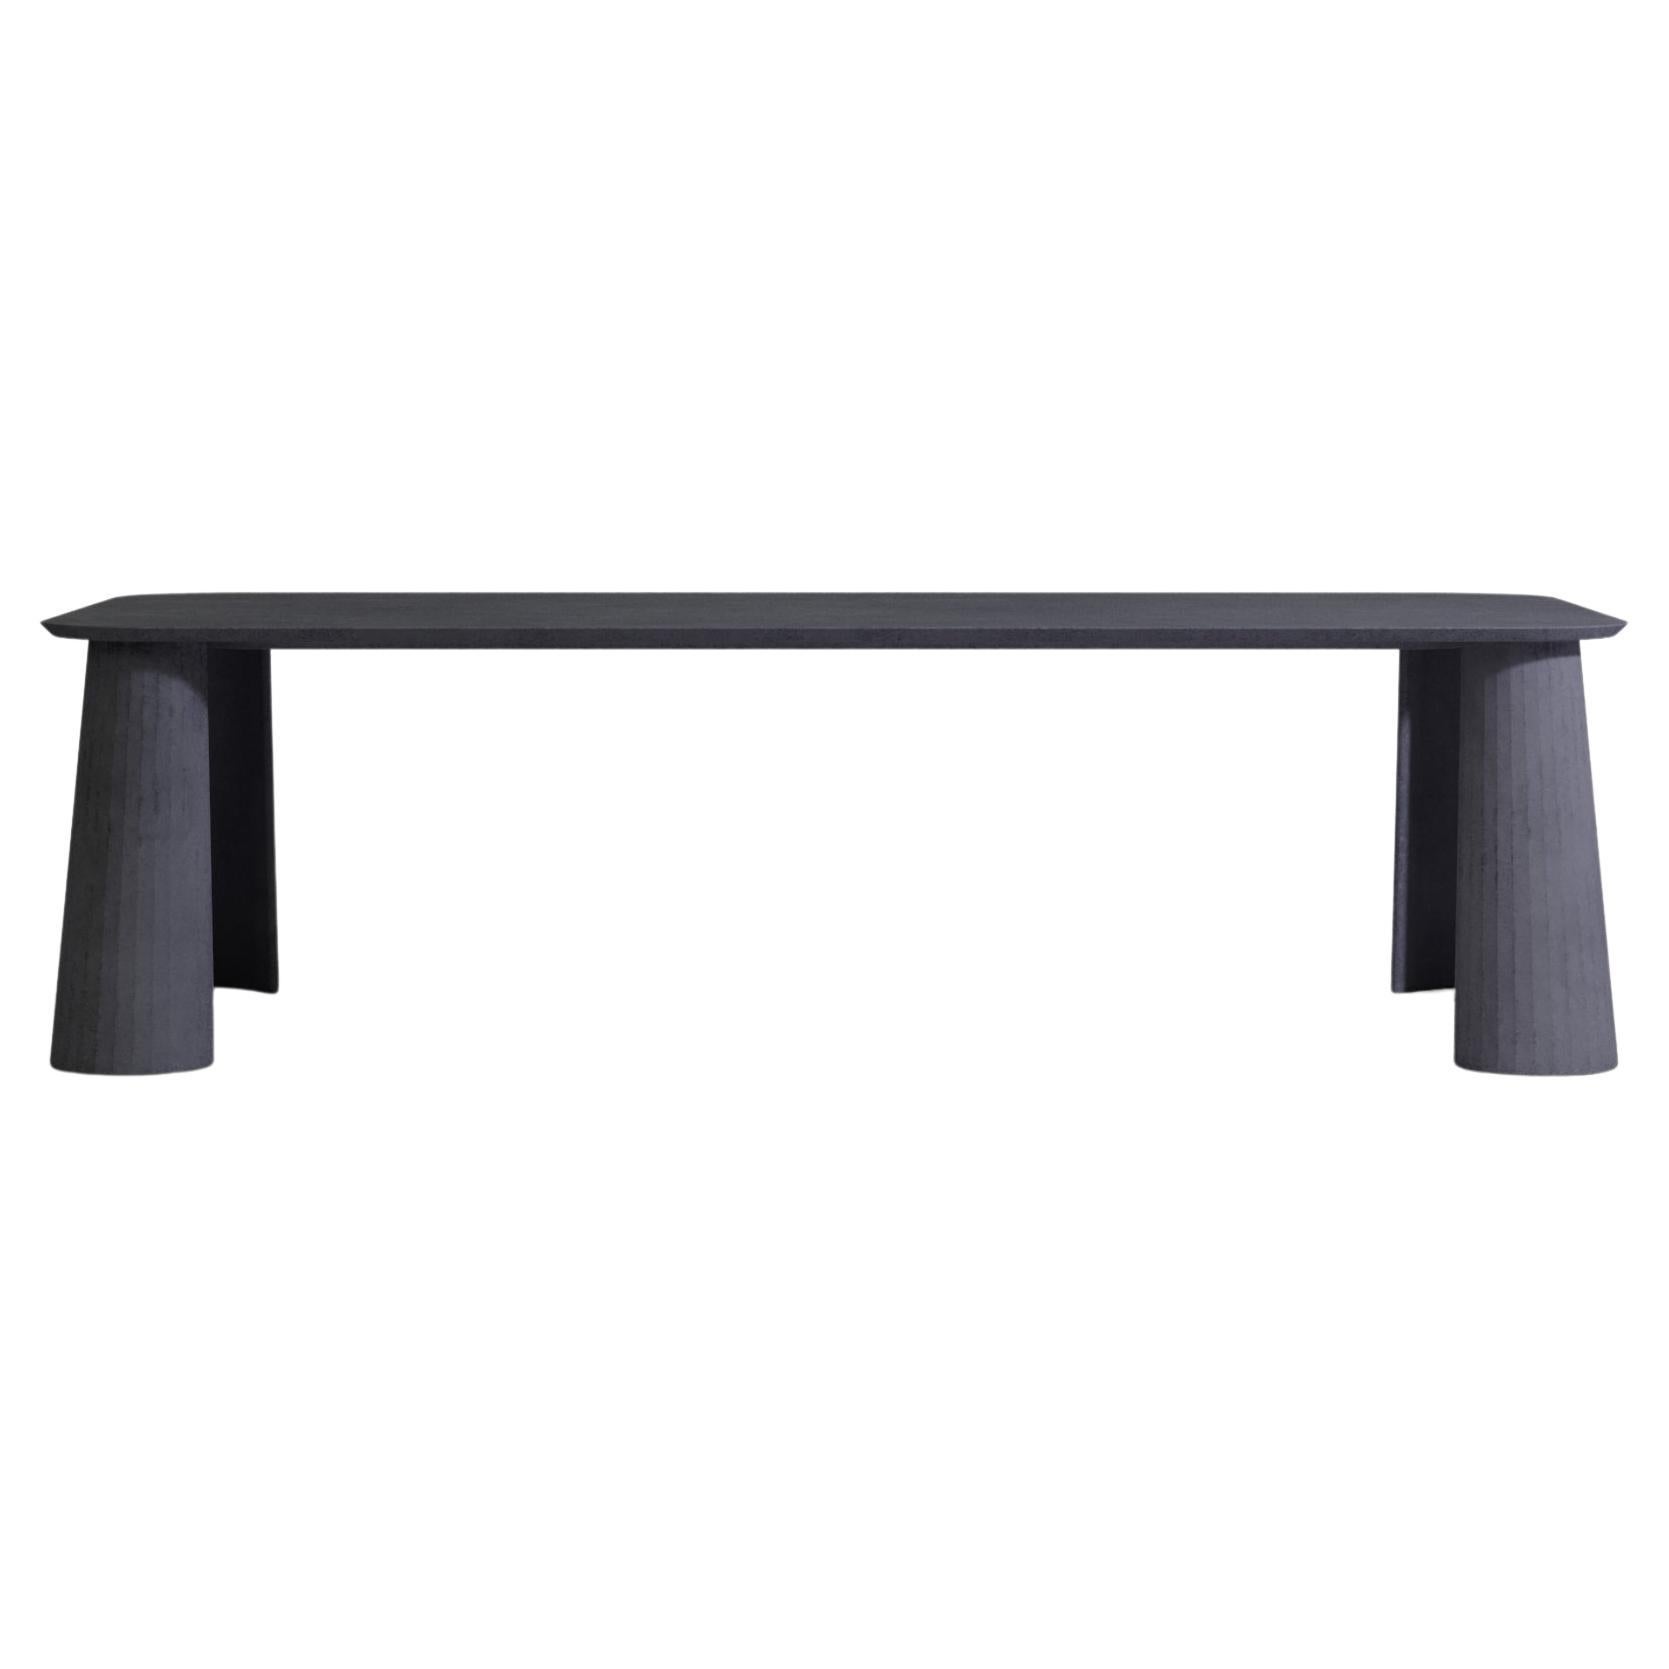 21St Century Studio Irvine Fusto Rectangular Dining Table Ink Cement Color For Sale